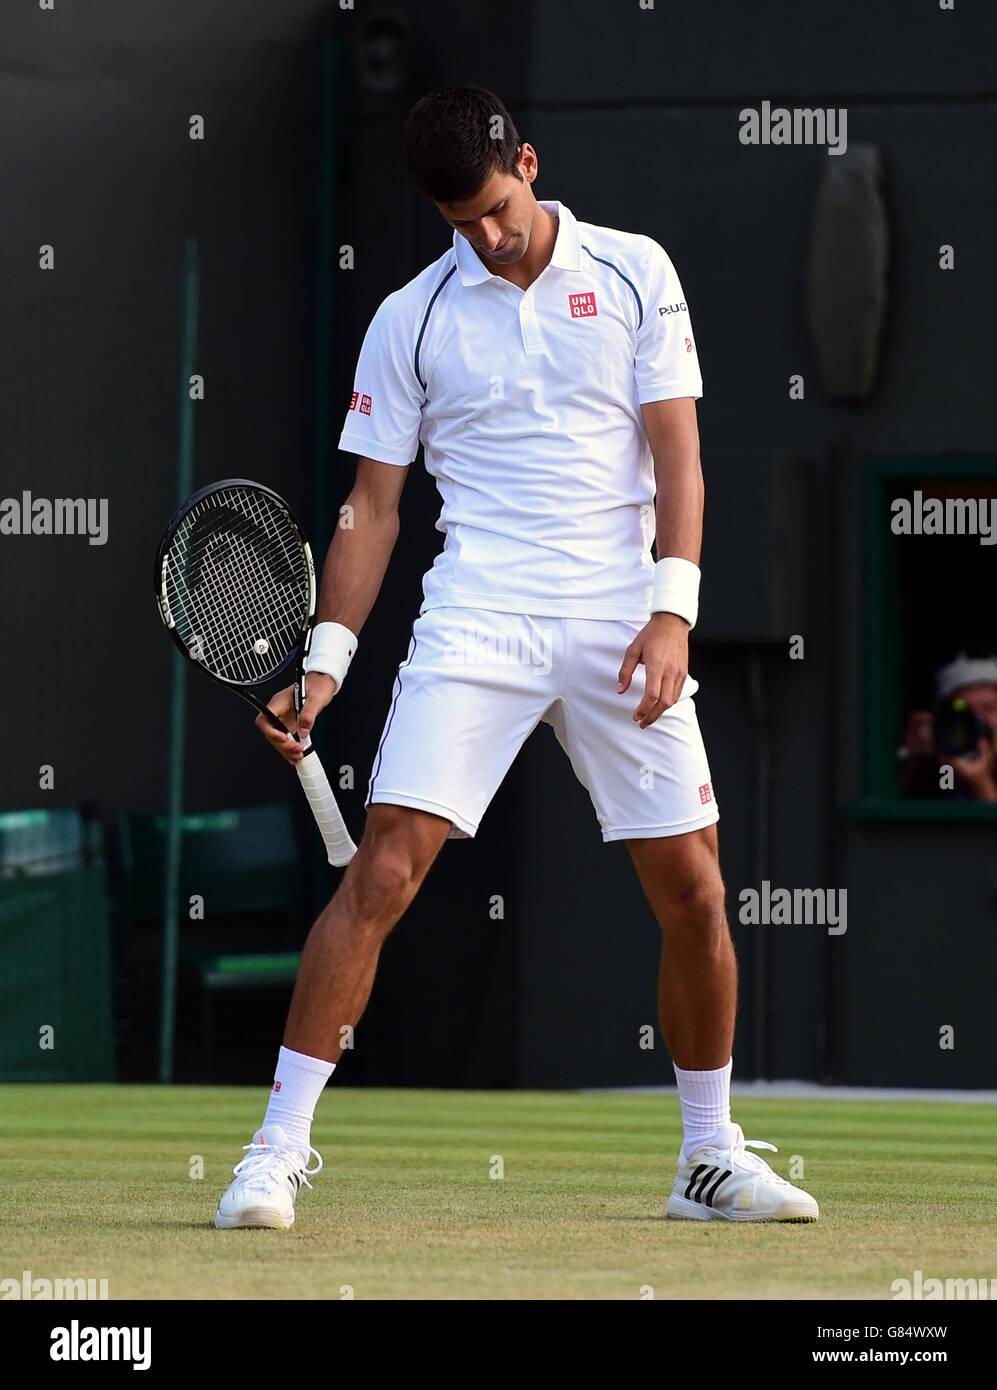 Novak Djokovic in action against Kevin Anderson during day Seven of the Wimbledon Championships at the All England Lawn Tennis and Croquet Club, Wimbledon. Stock Photo